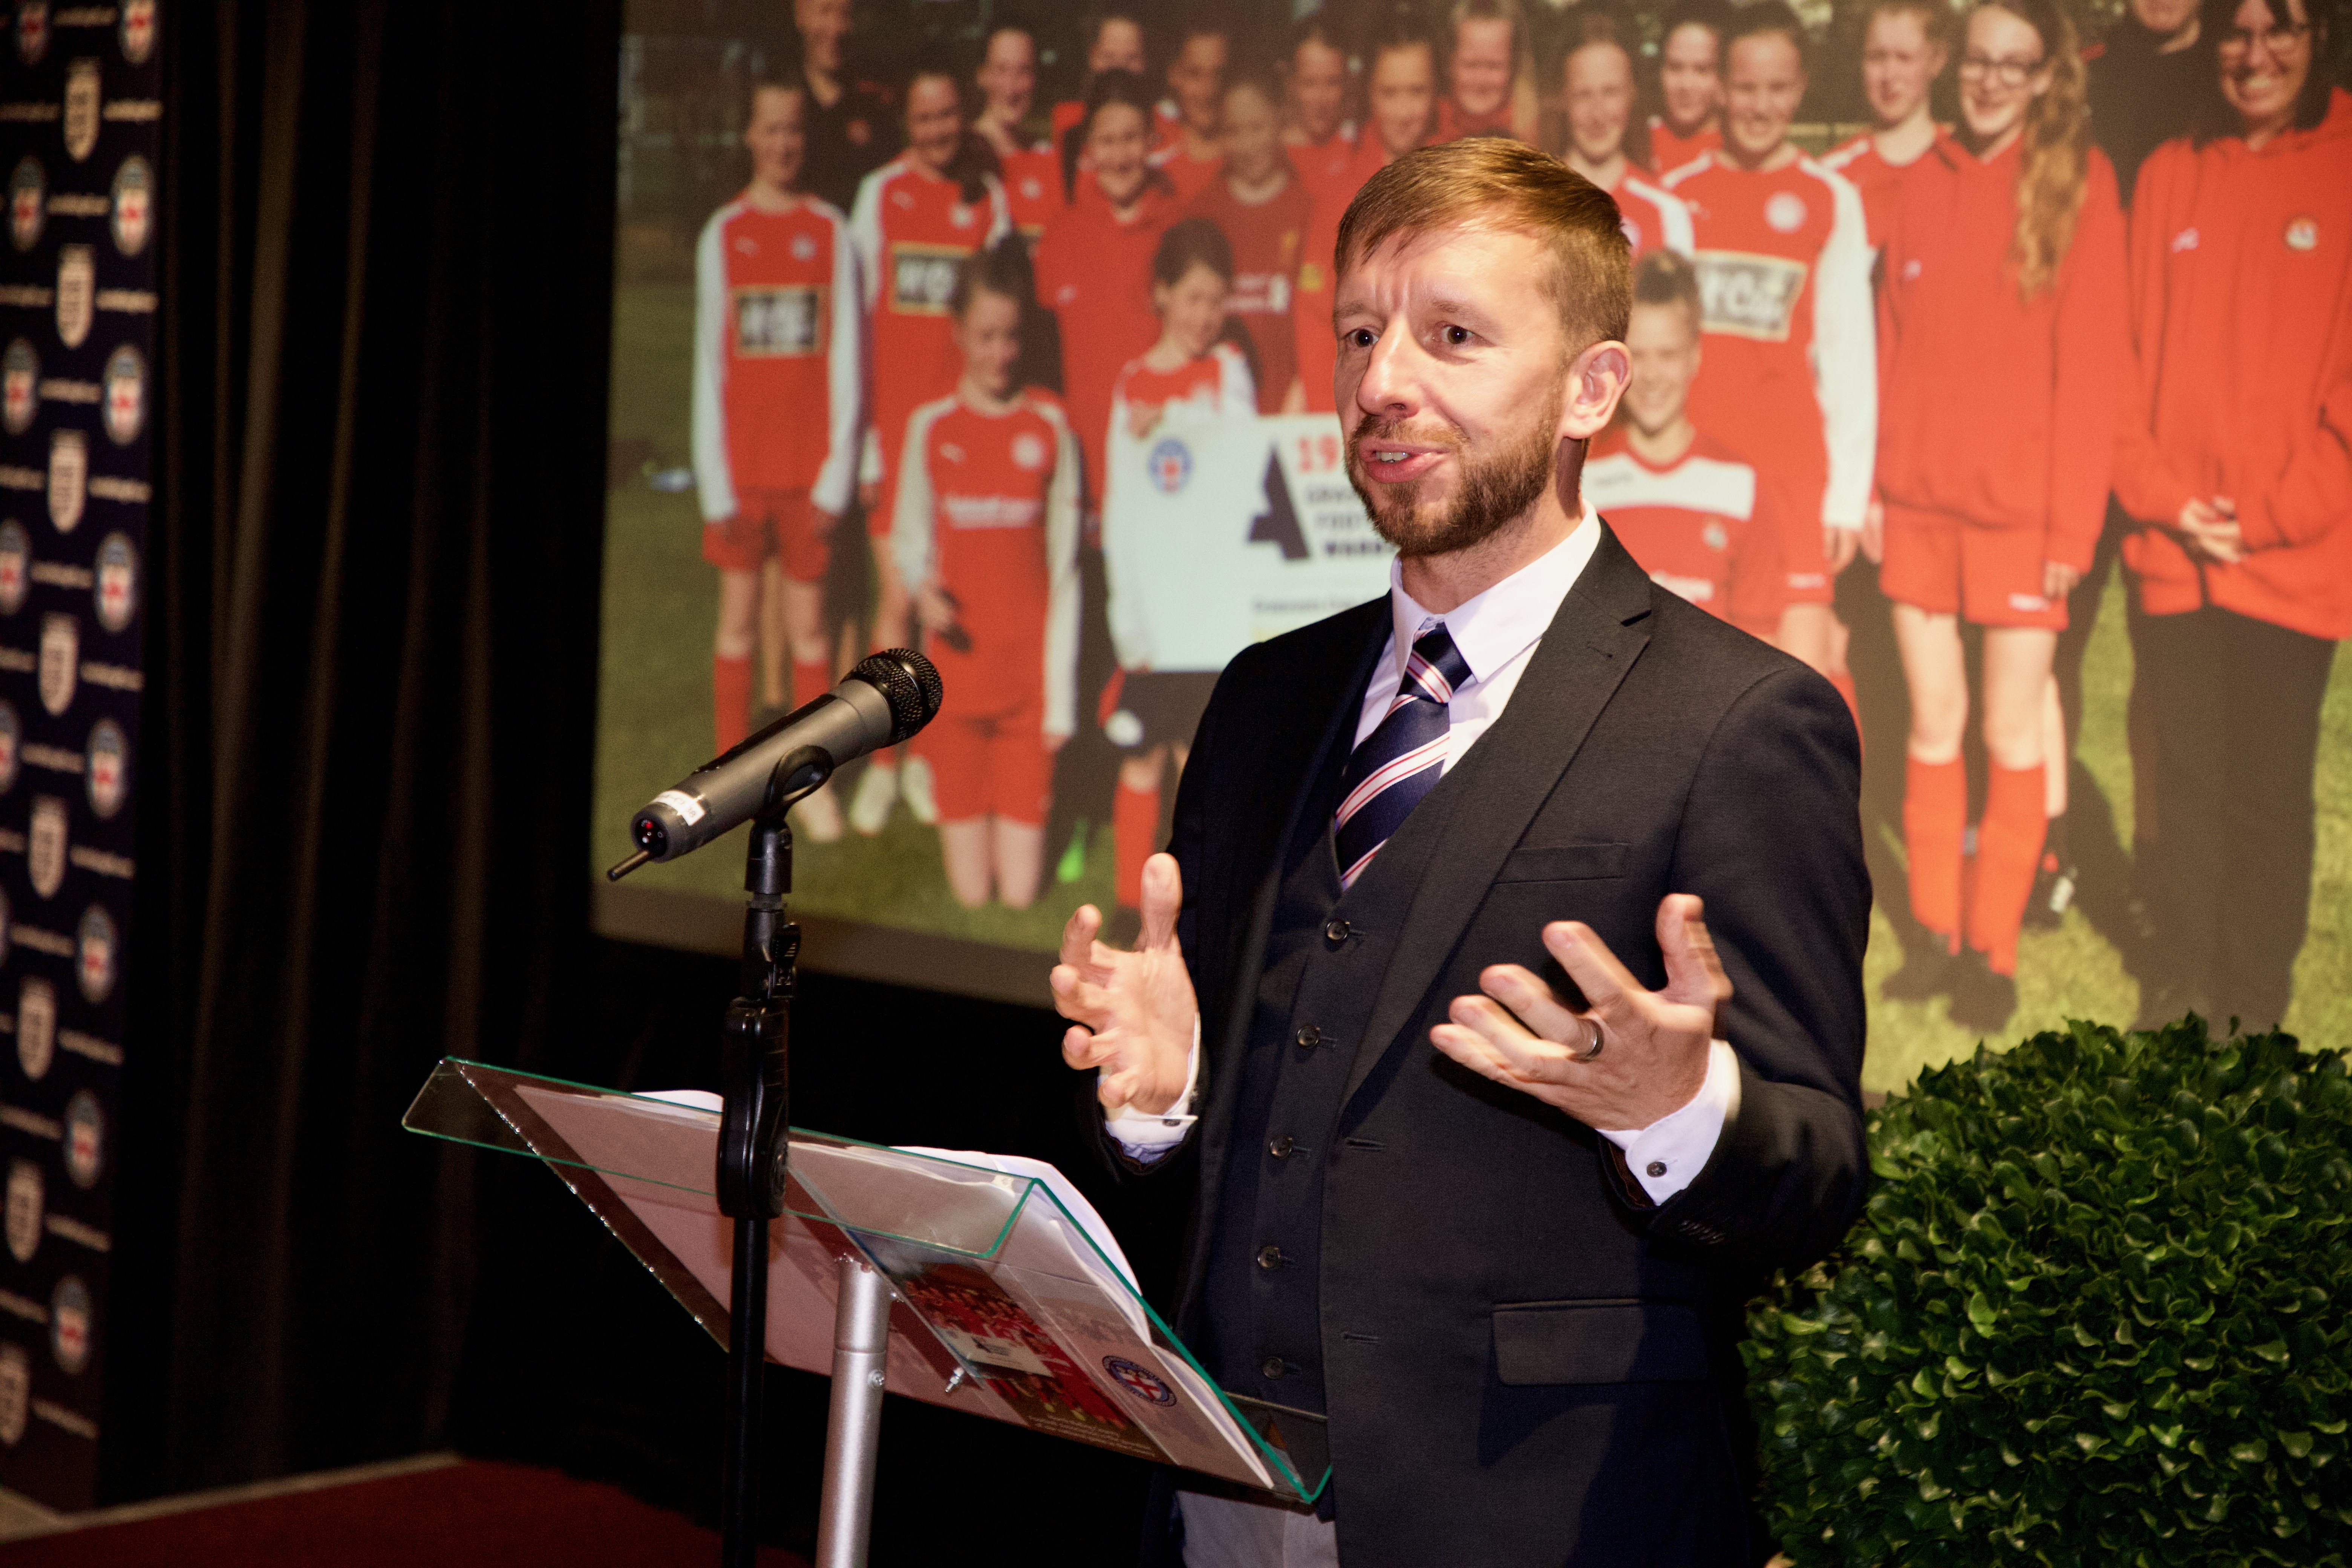 Steven Wade, chief executive of the North Riding County Football Association